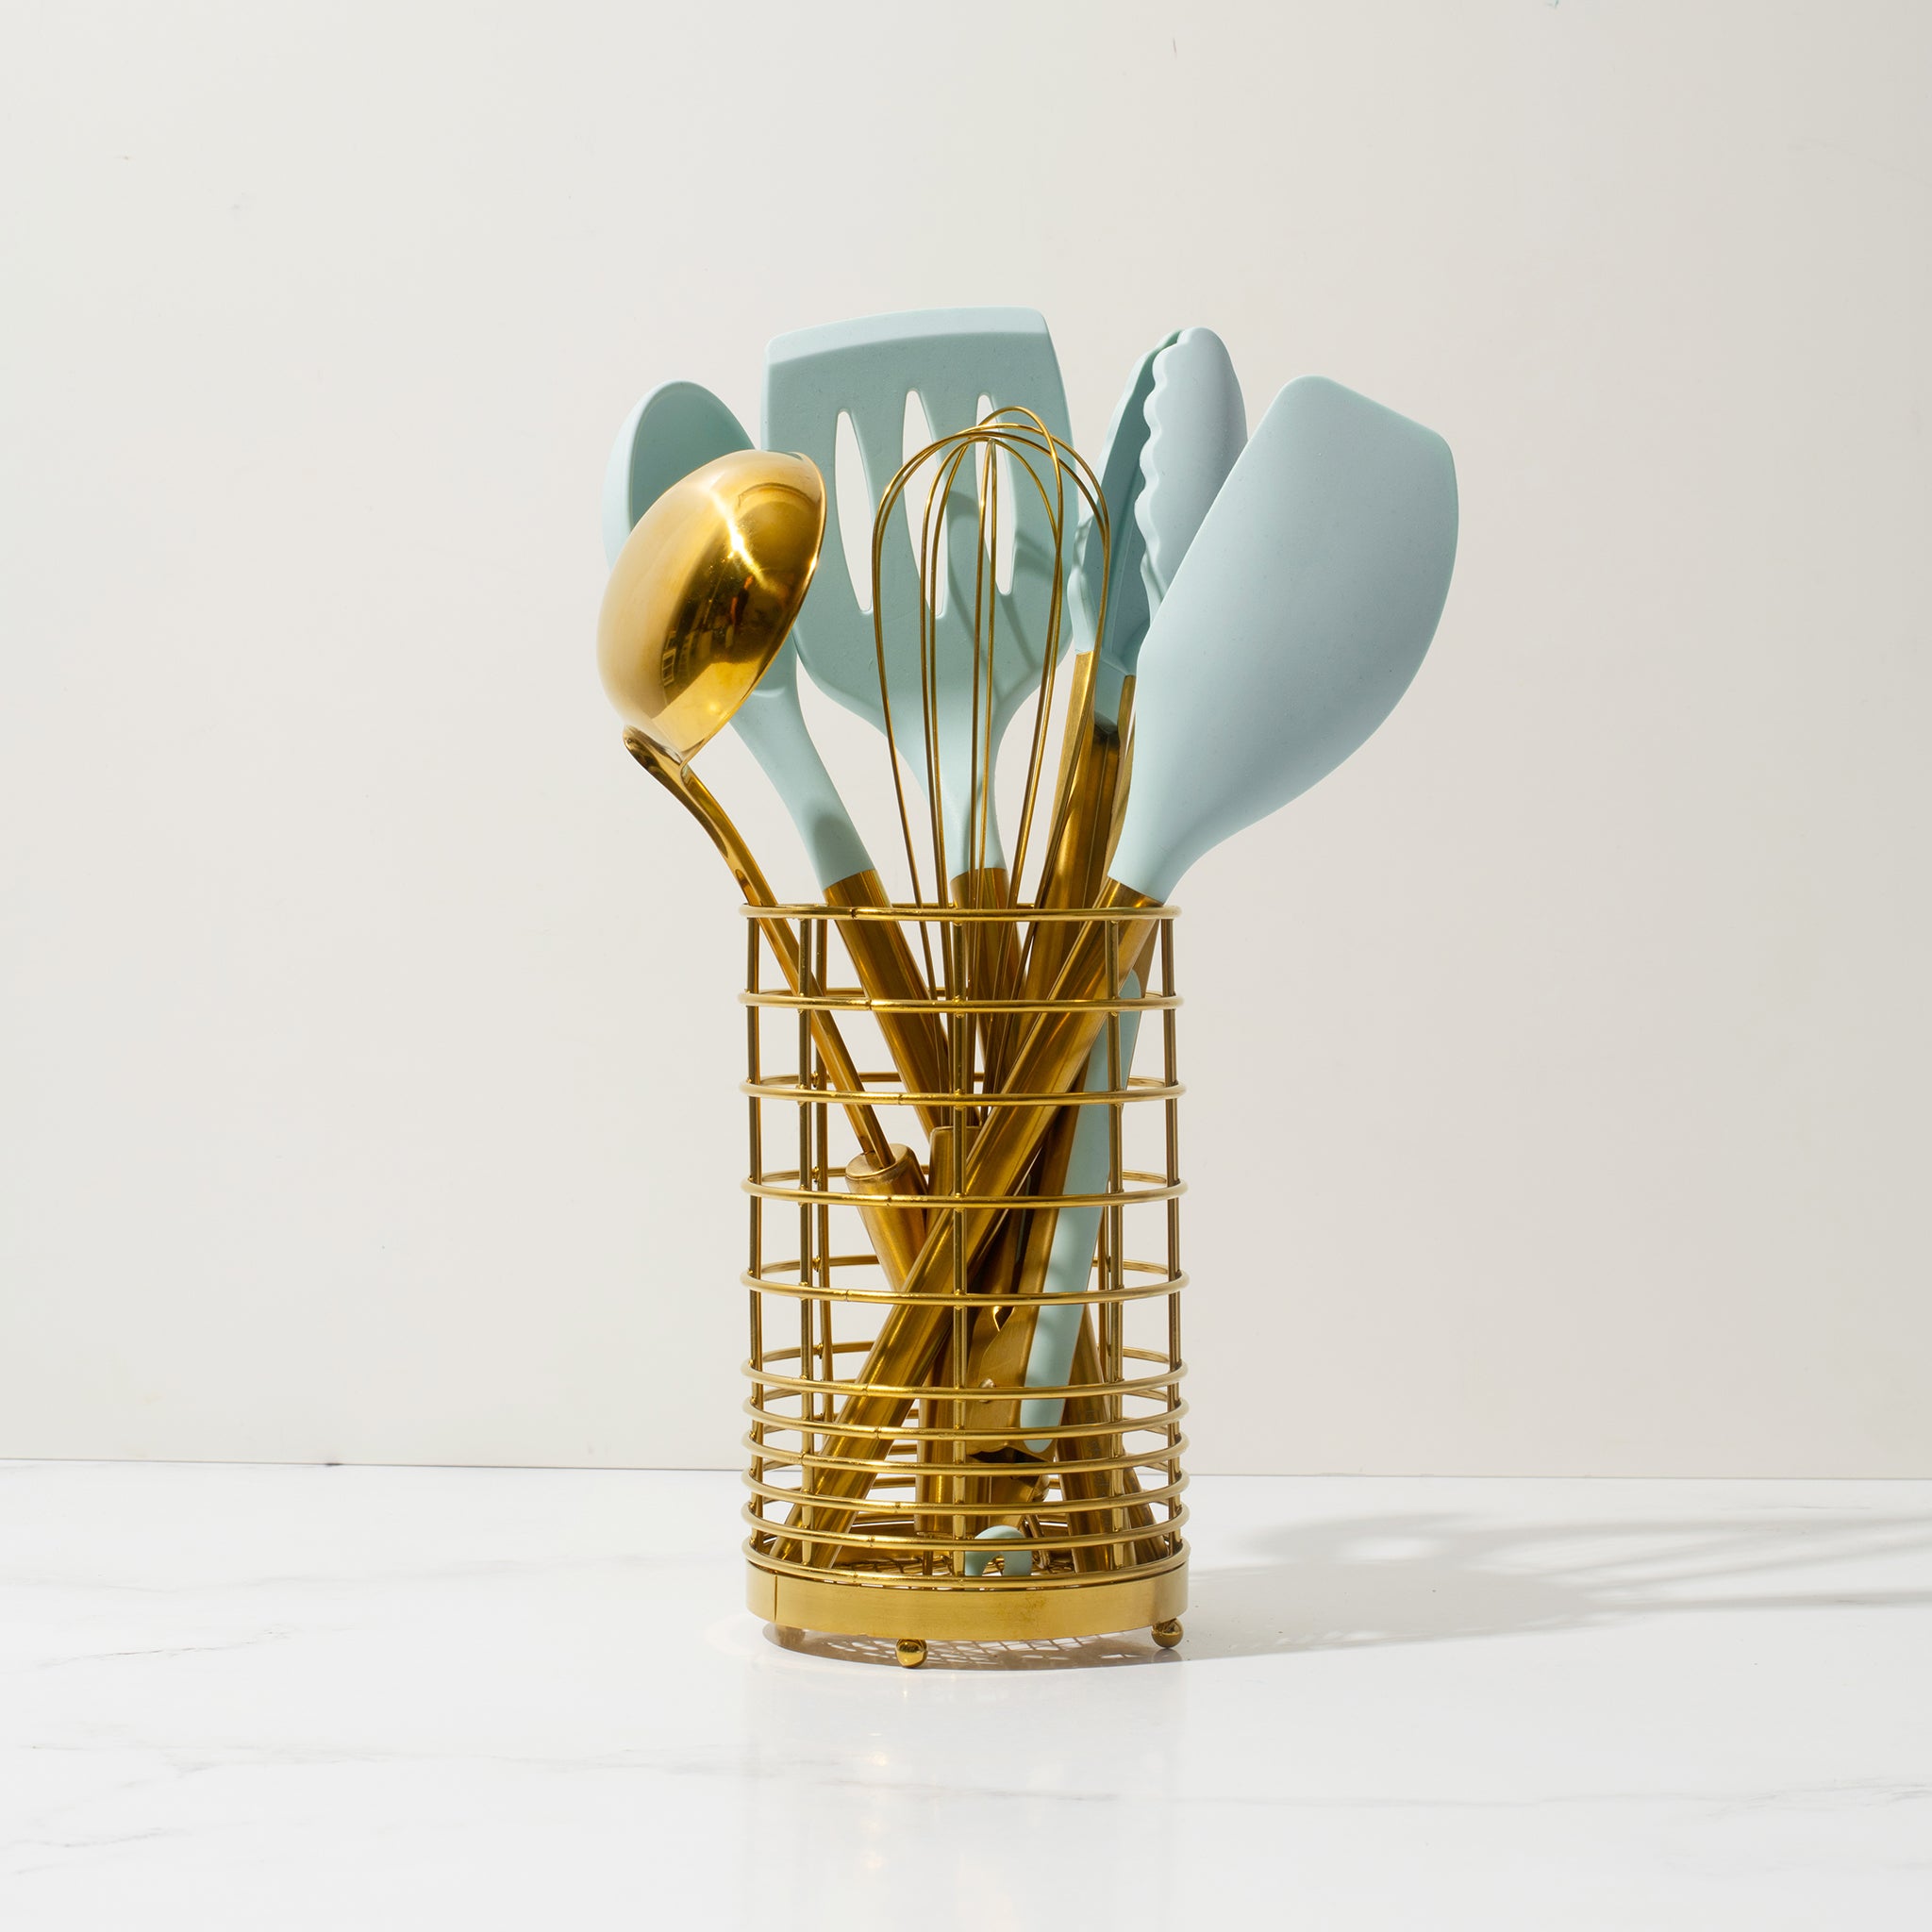 Teal and Gold Kitchen Utensils Set with Holder - Styled Settings